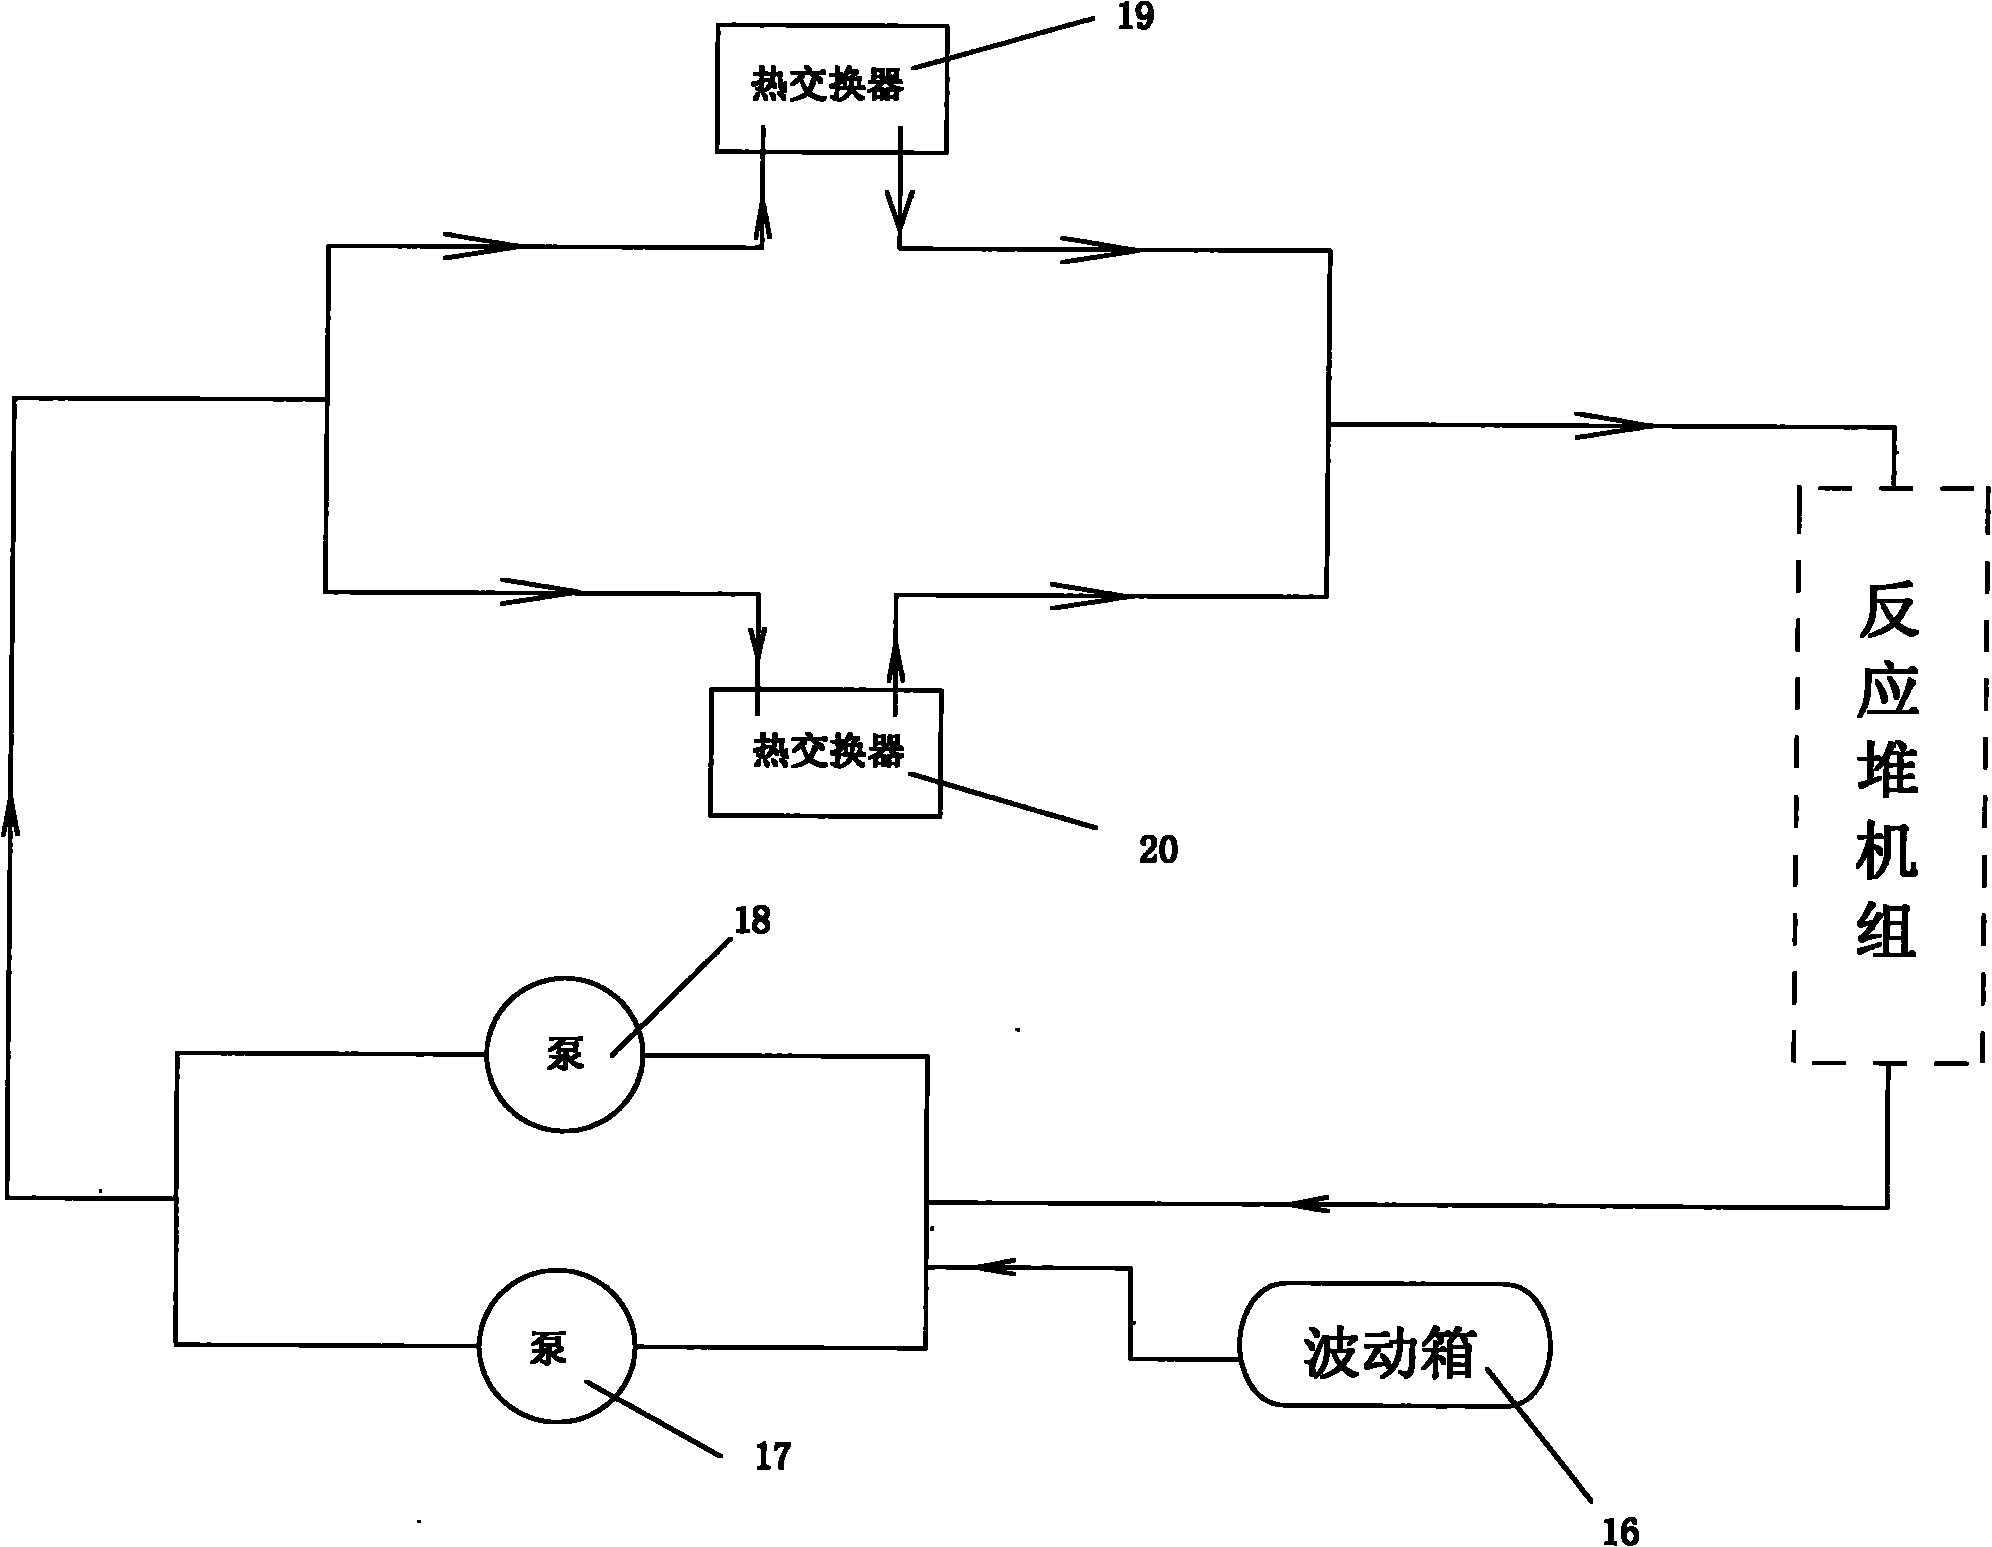 Nuclear island cooling system for double reactor units and cooling method thereof